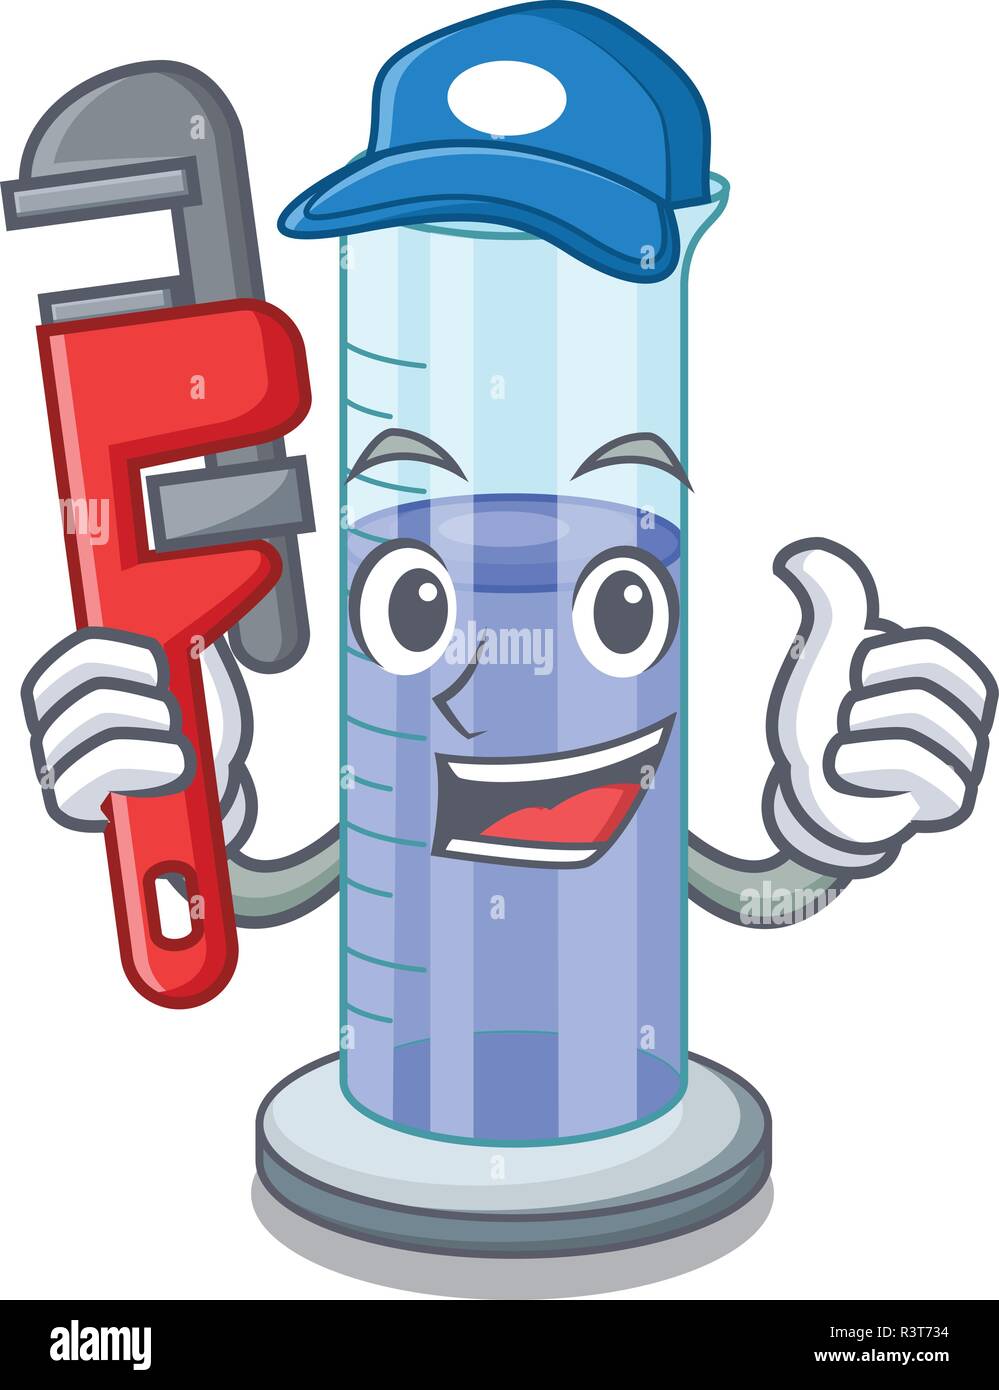 Plumber graduated cylinder on for cartoon trial Stock Vector Image ...